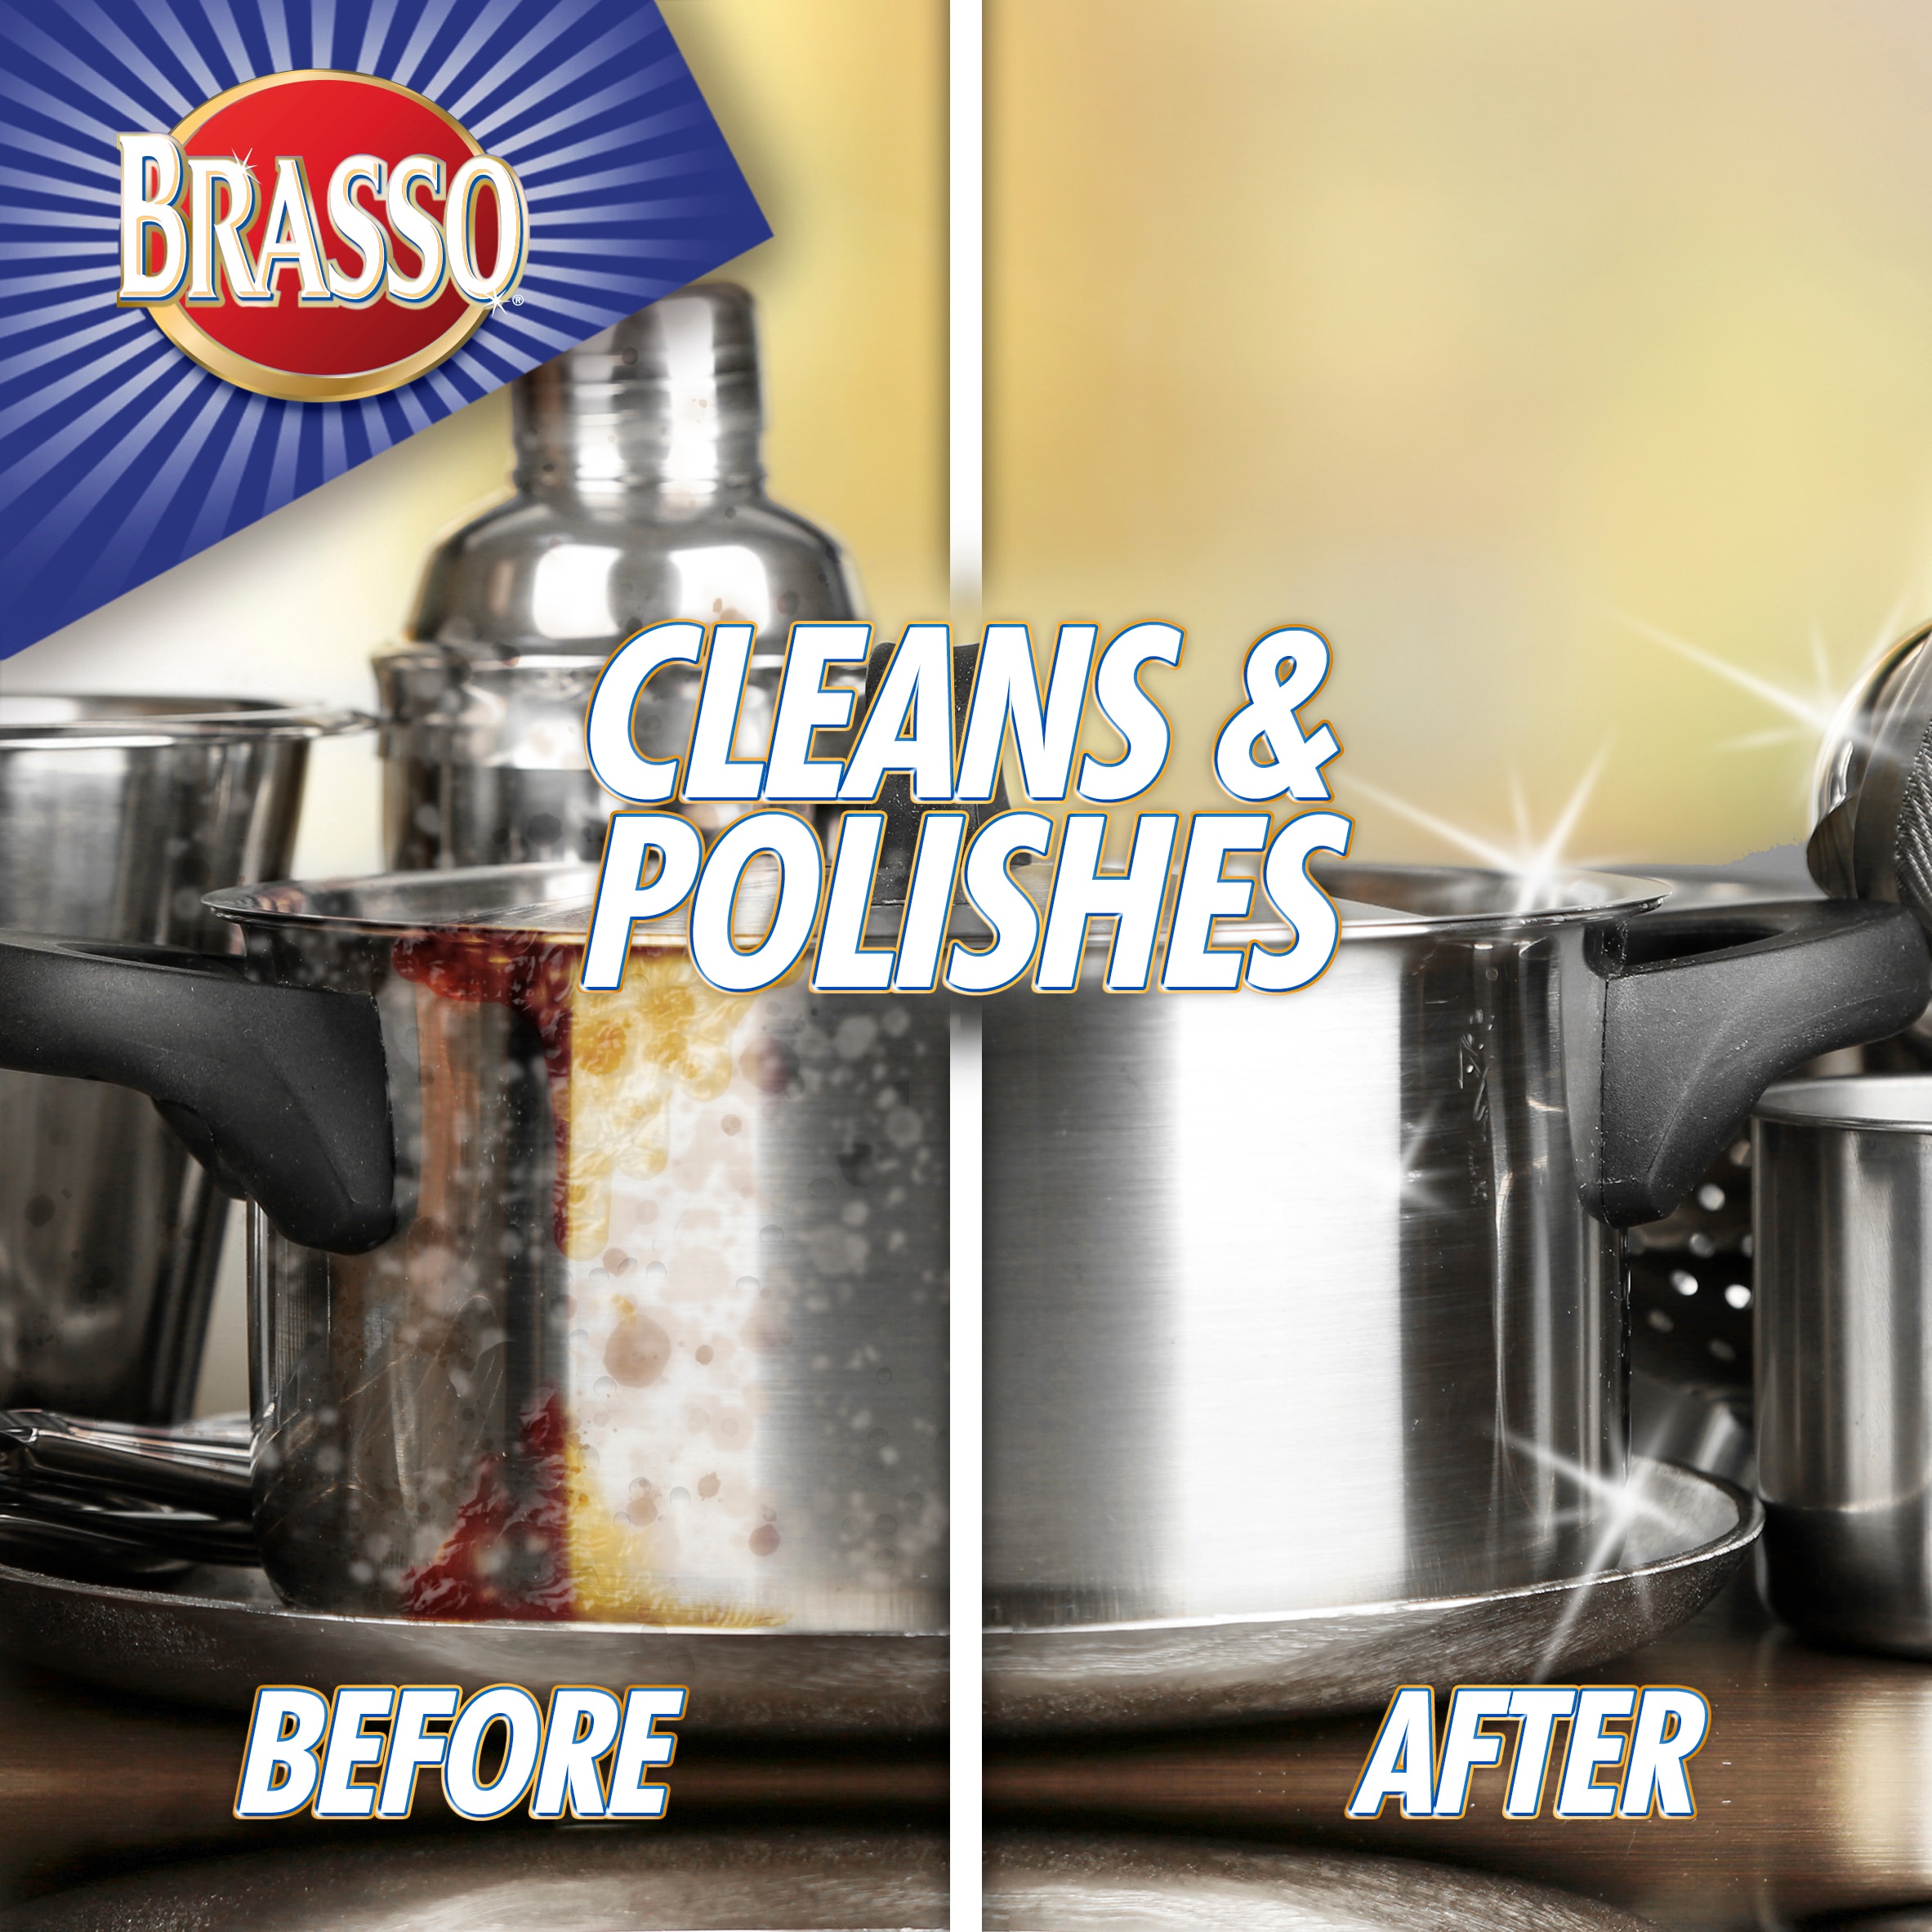 Brasso Metal Polish For brass, copper, stainless steel and chrome